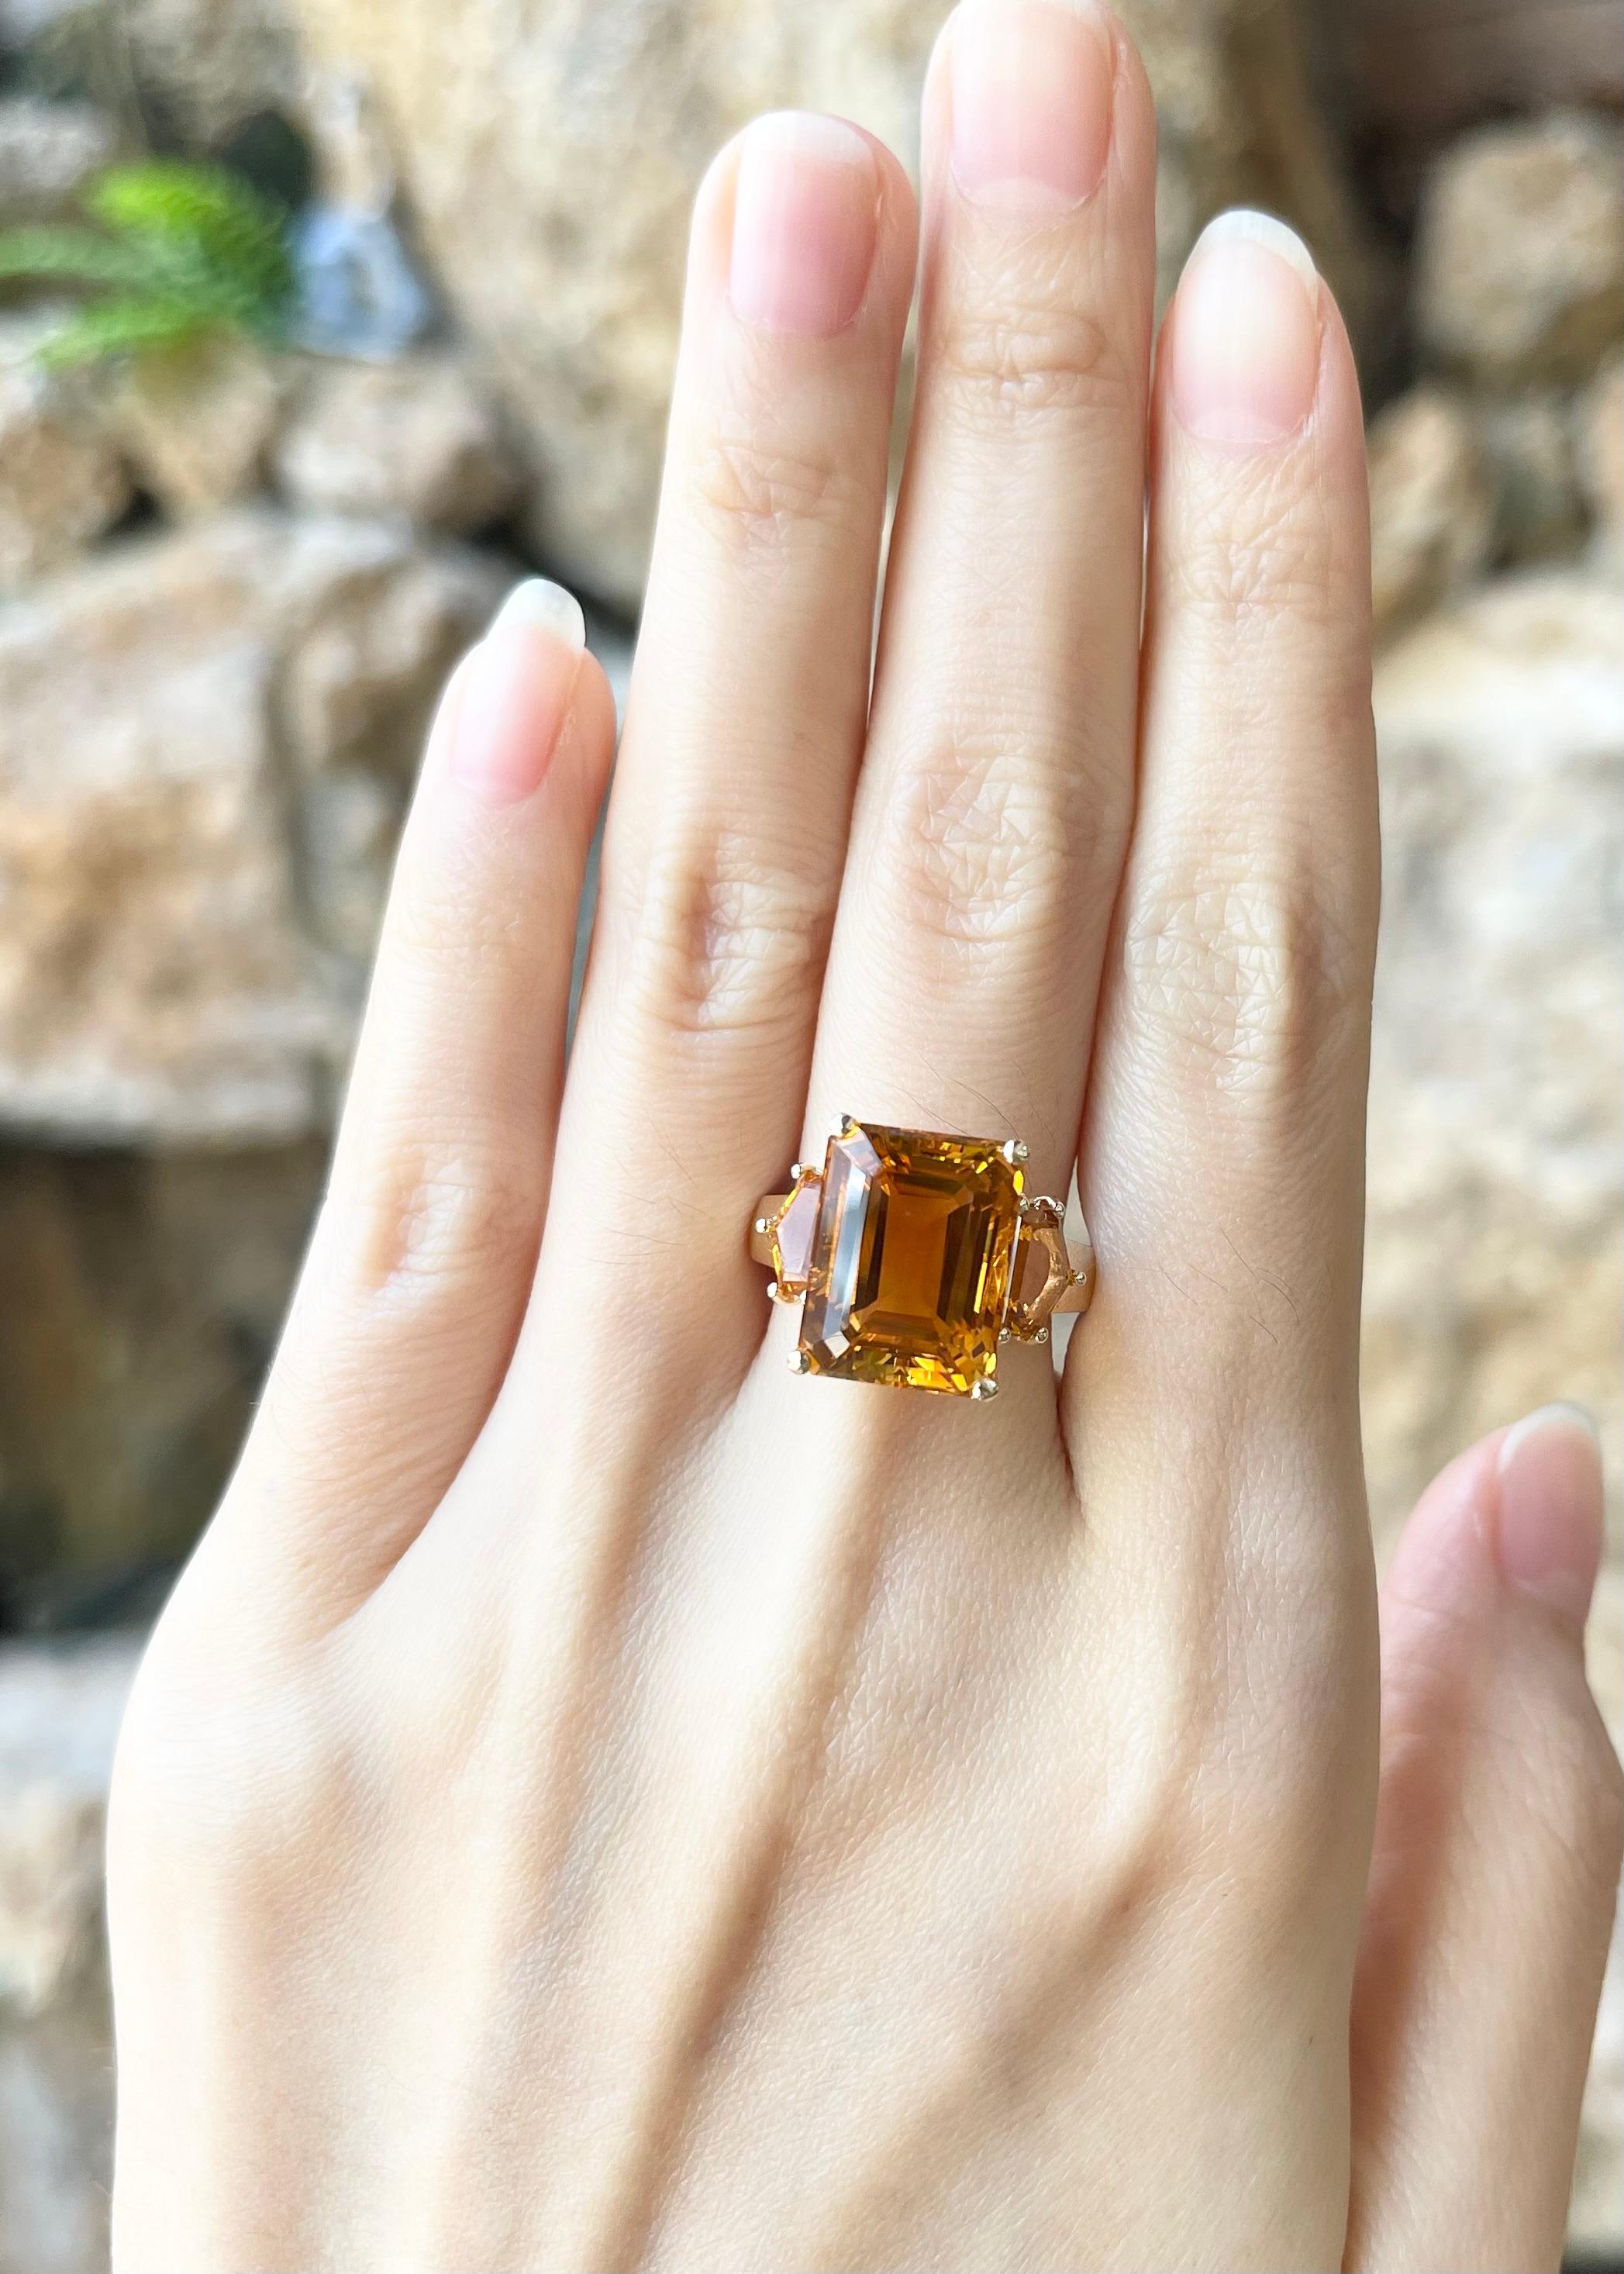 Citrine 9.33 carats, Citrine 1.55 carats Ring set in 14K Gold Settings

Width:  1.7 cm 
Length: 1.4 cm
Ring Size: 53
Total Weight: 7.10 grams

